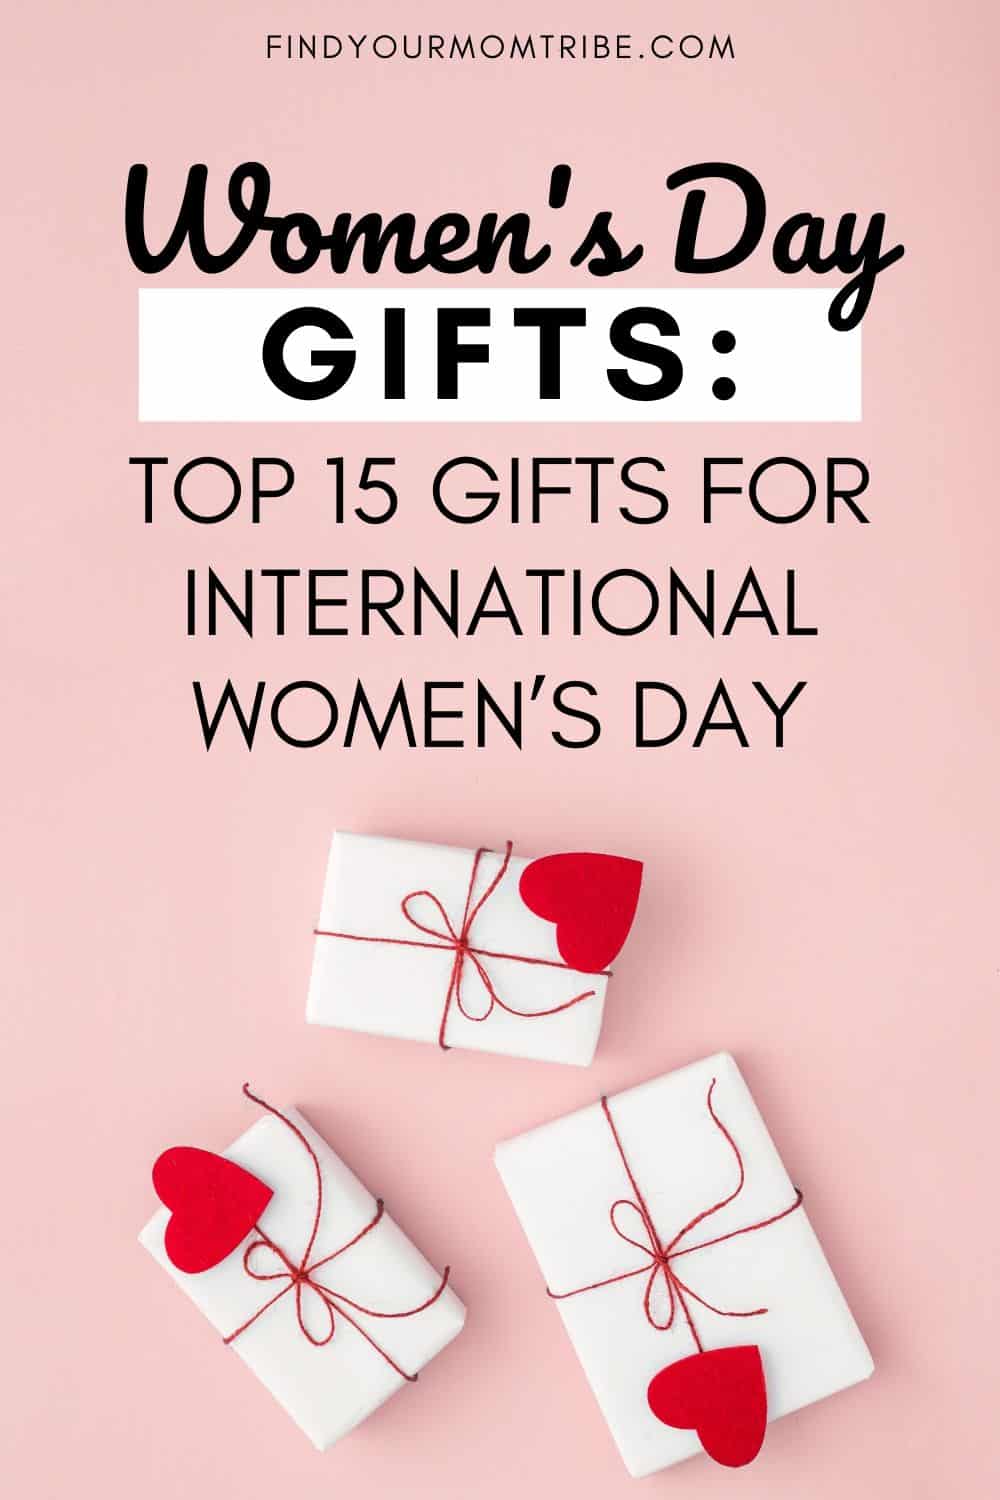 Women’s Day Gifts Top 15 Gifts For International Women’s Day